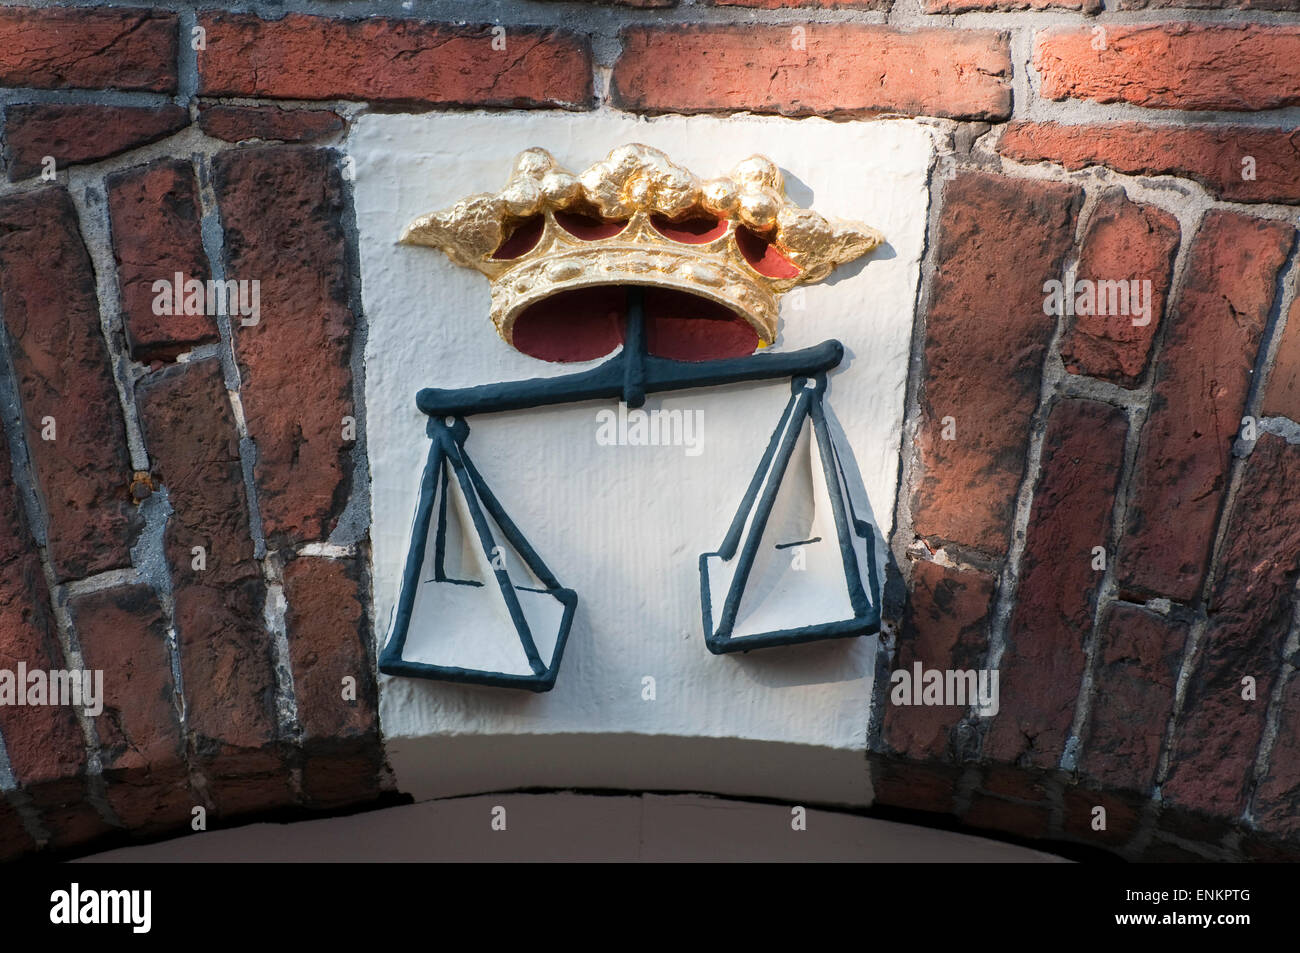 crown and scale, old Leer, Ostfriesland, Lower Stock Photo - Alamy